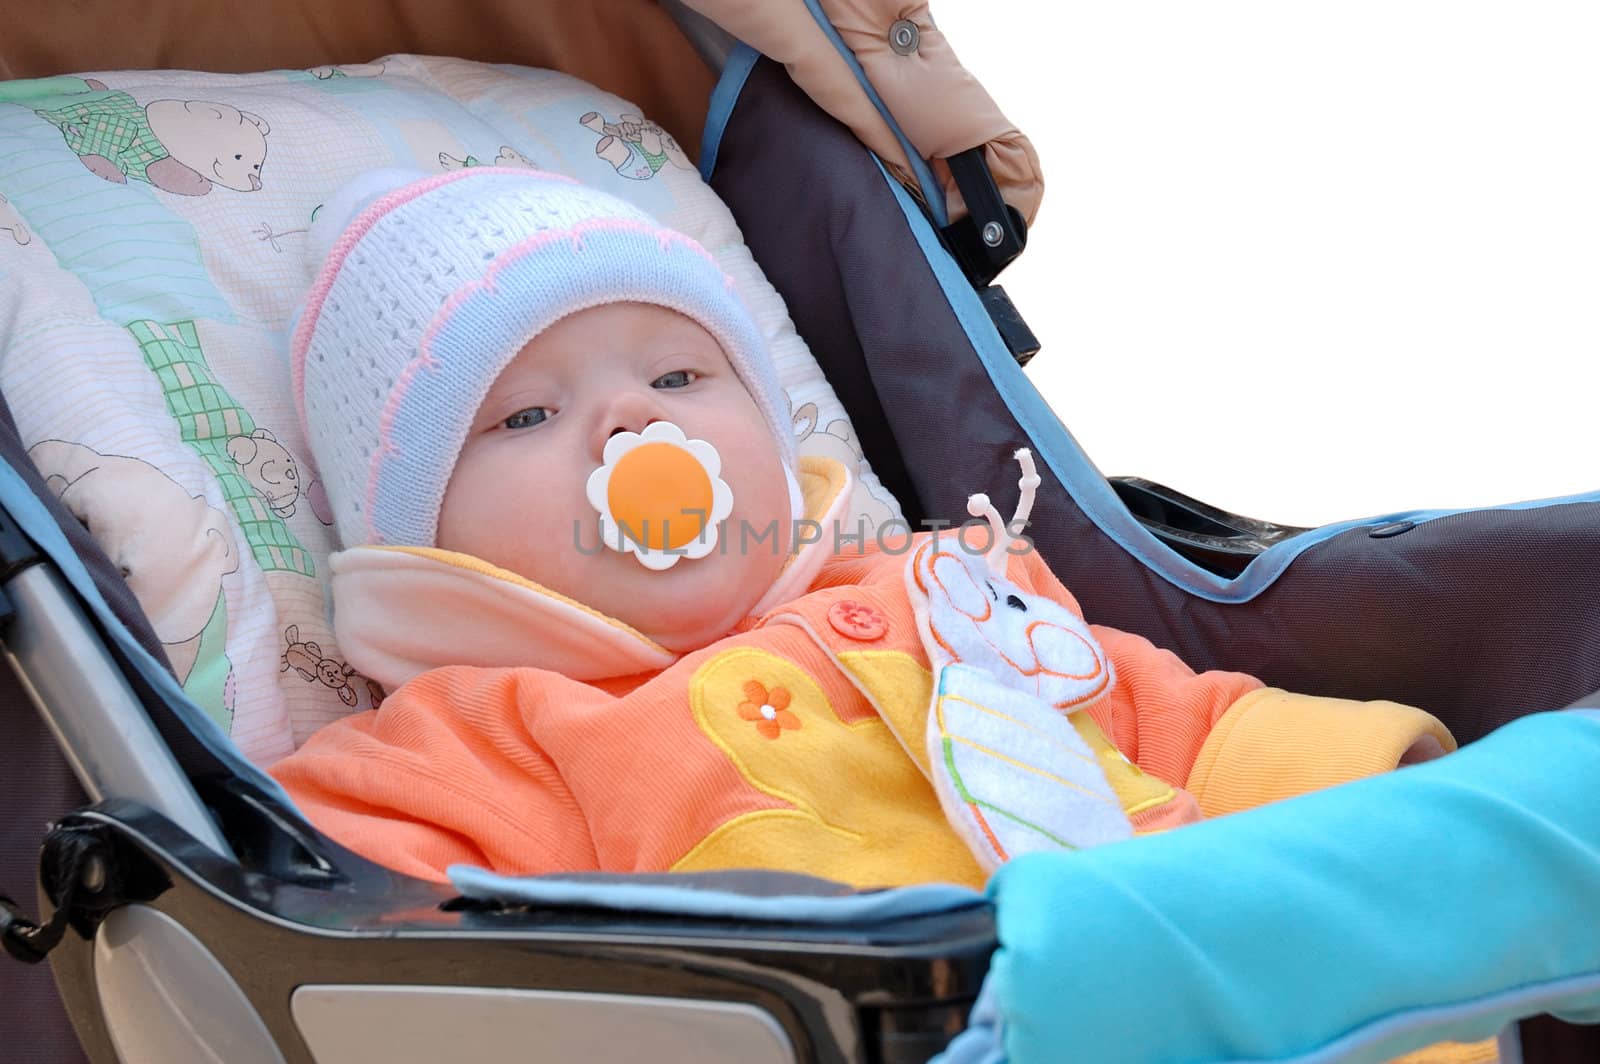 Little girl with baby's dummy sit in carriage. In cap and bright orange jacket.